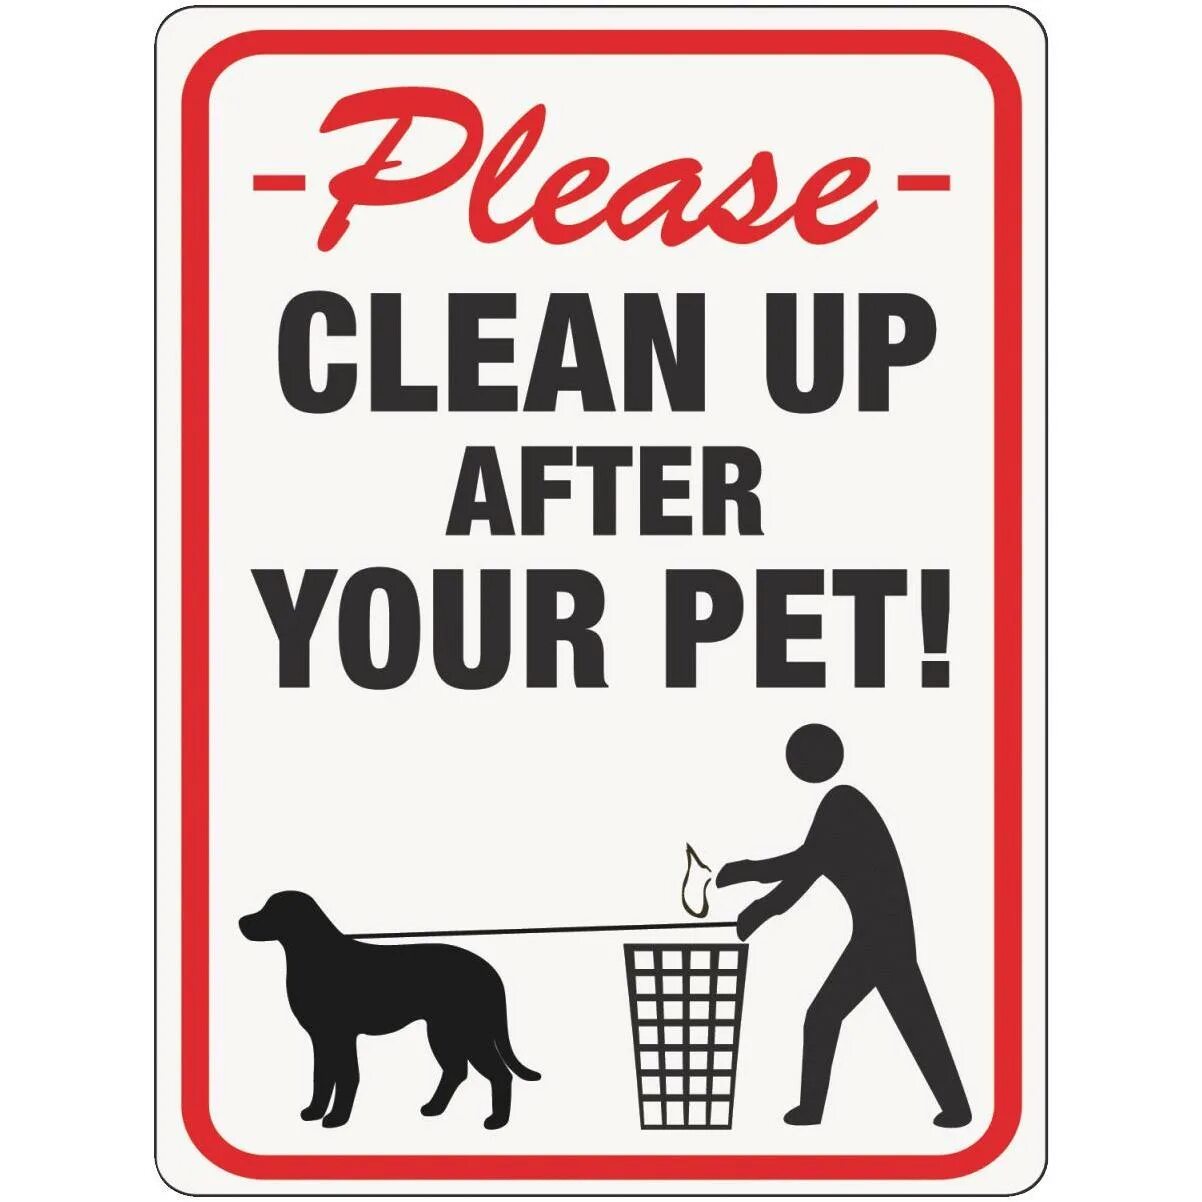 After your pet. Clean up after your Dog. Please clean up after your Dog sign. Please clean after your Pet. Cleans up after.